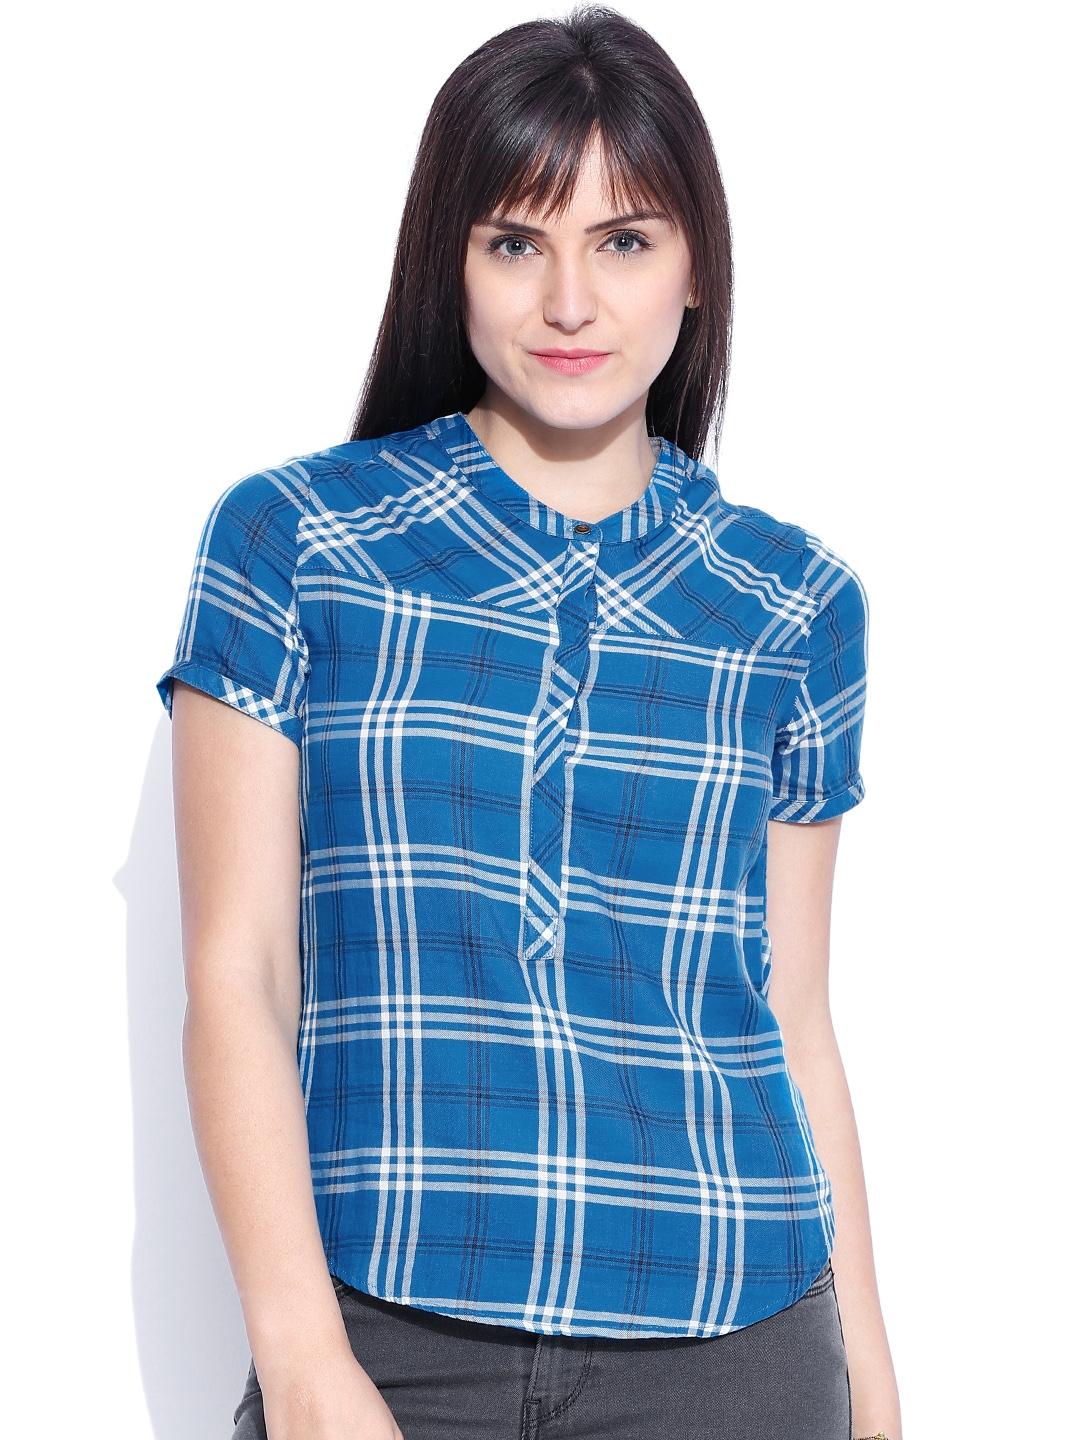 Buy Levis Blue & White Checked Shirt - Shirts for Women 1117817 | Myntra